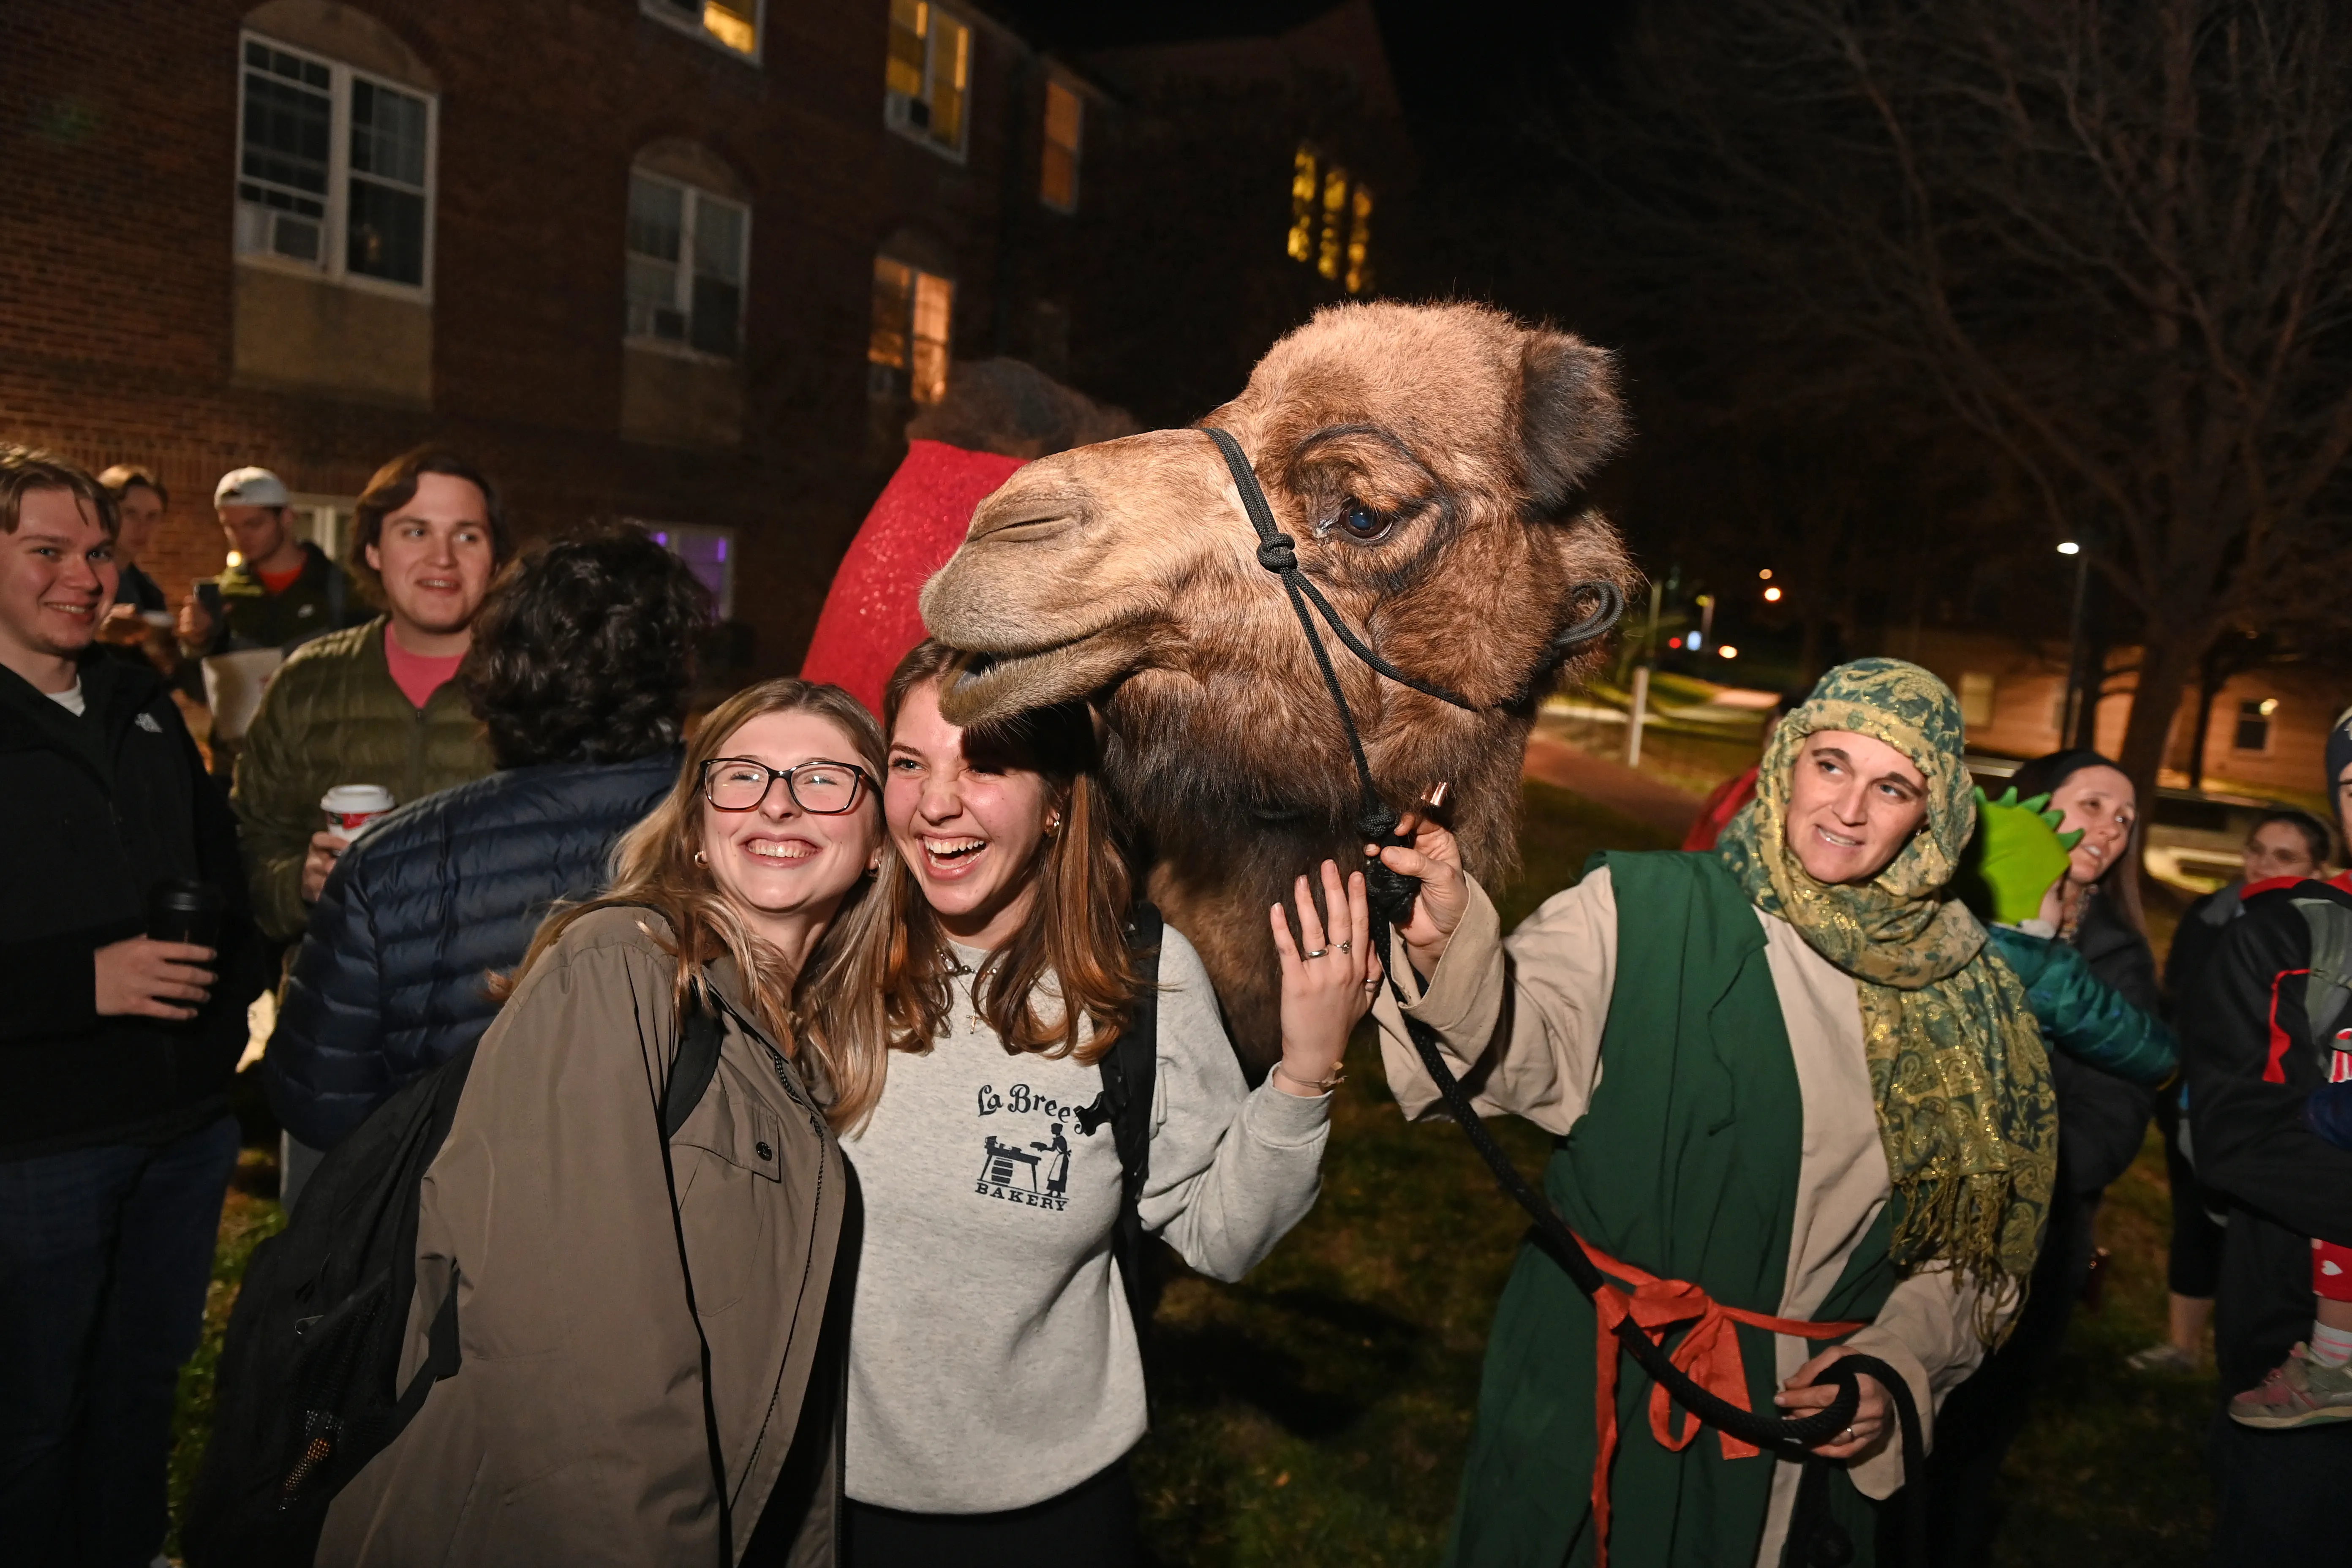 Students at The Catholic University of America posing with Delilah the Camel at the school's annual "Greccio" live nativity event on Dec. 12, 2021.?w=200&h=150